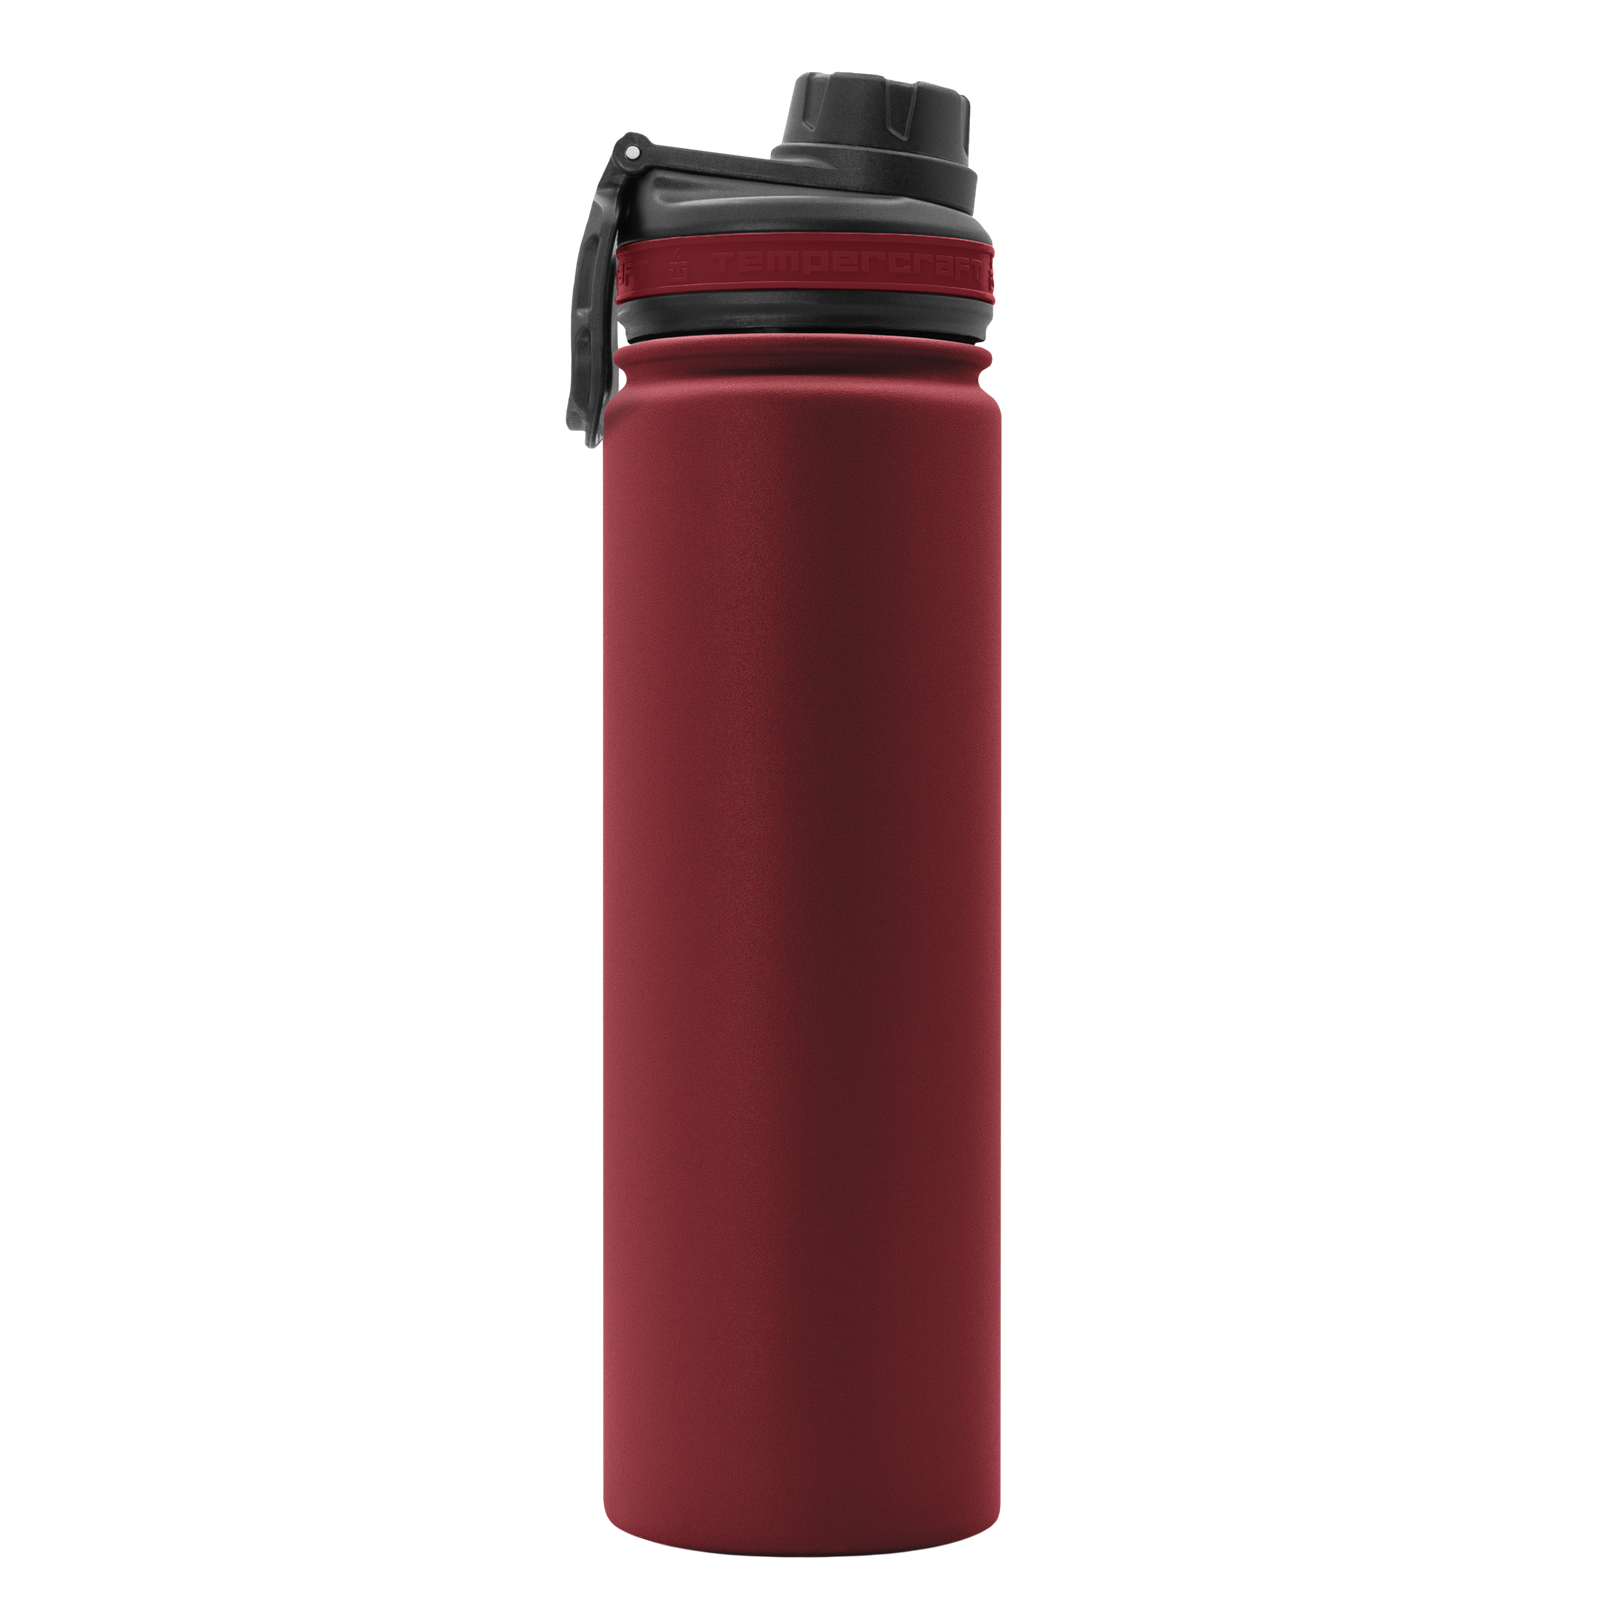 Insulated Water Bottle with Straw, 22 oz Stainless Steel Sport